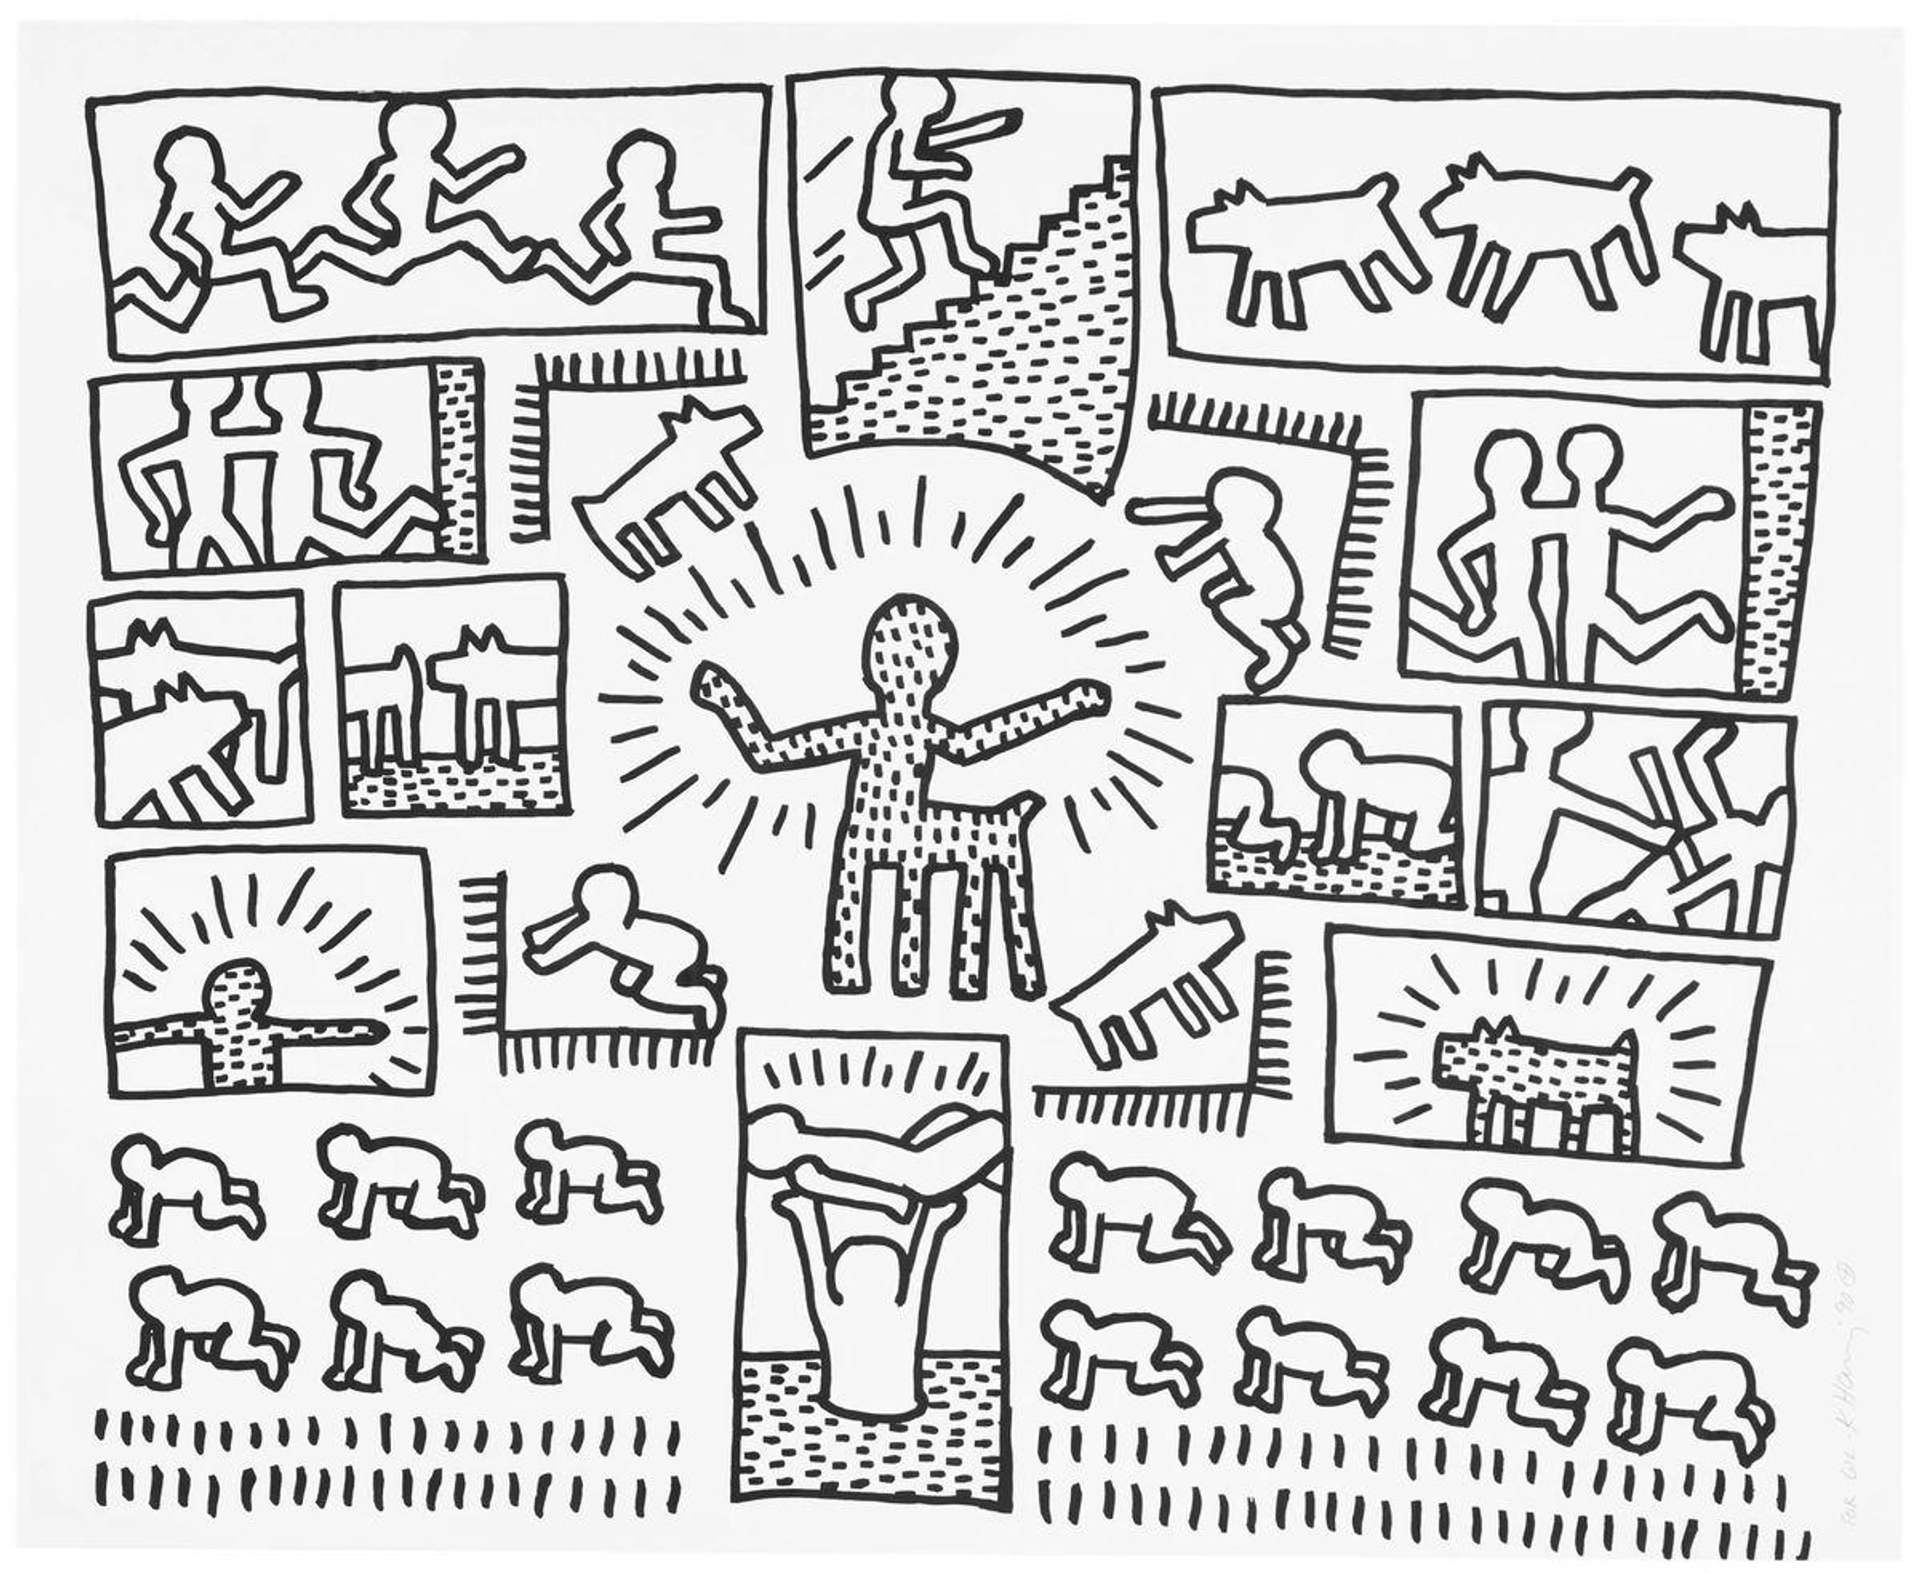 Keith Haring: The Blueprint Drawings 10 - Signed Print